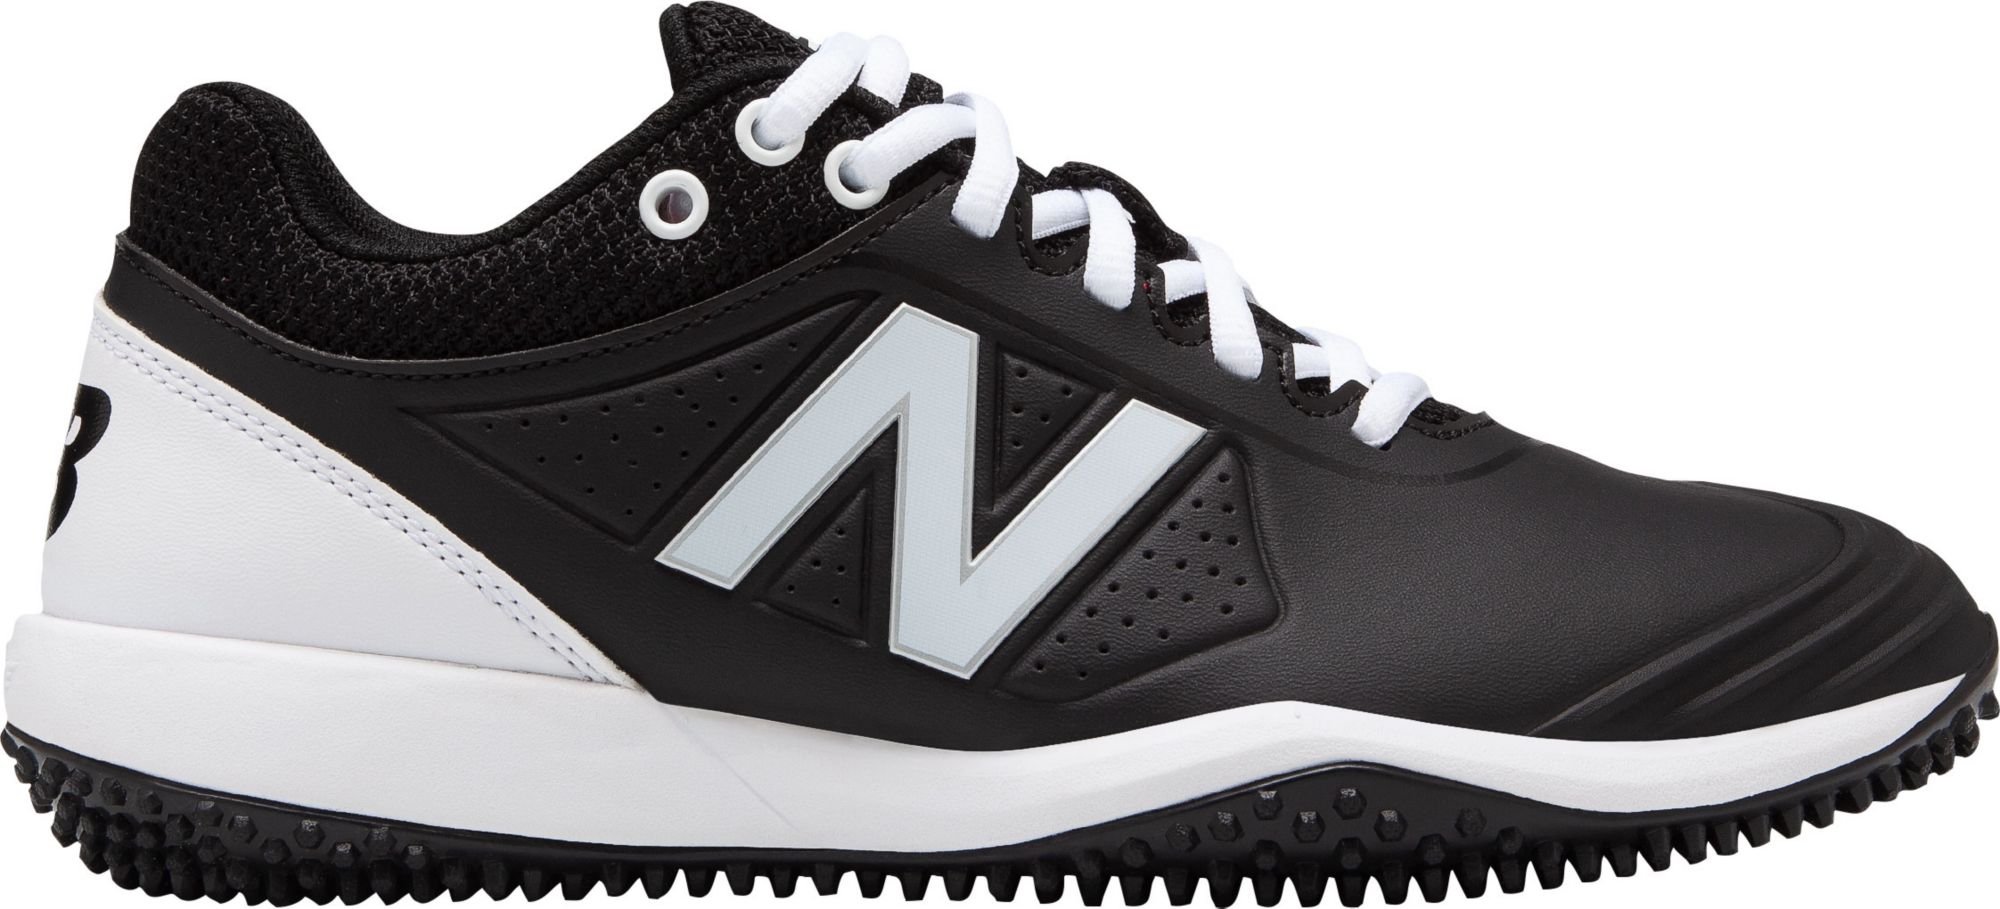 new balance fastpitch turf shoes